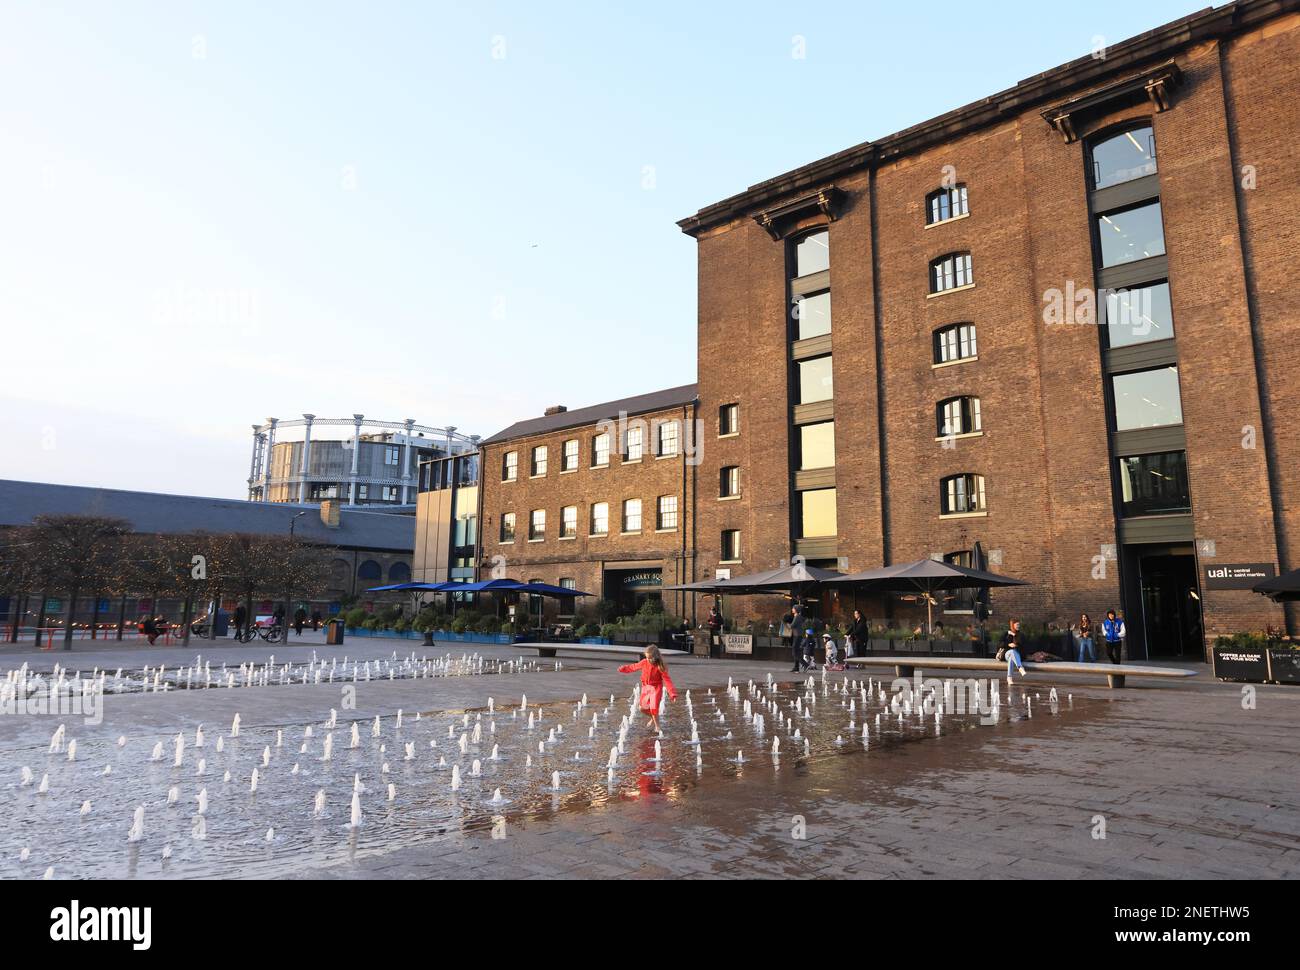 Winter sunshine on St Martins Central School of Art and the Granary Square fountains, at Kings Cross, north London, UK Stock Photo